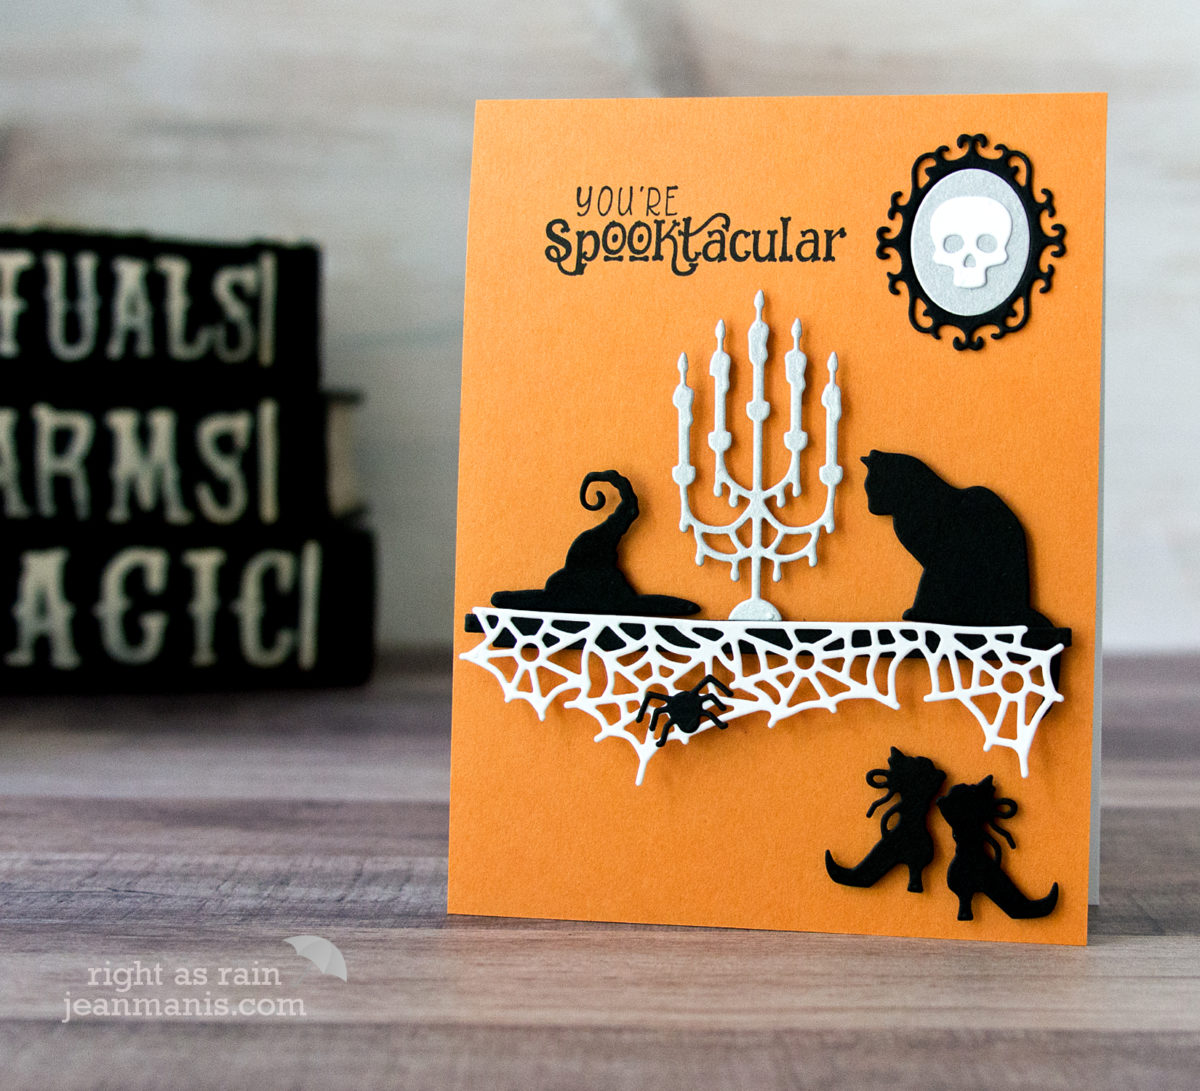 Taylored Expressions – You’re SPOOKtacular